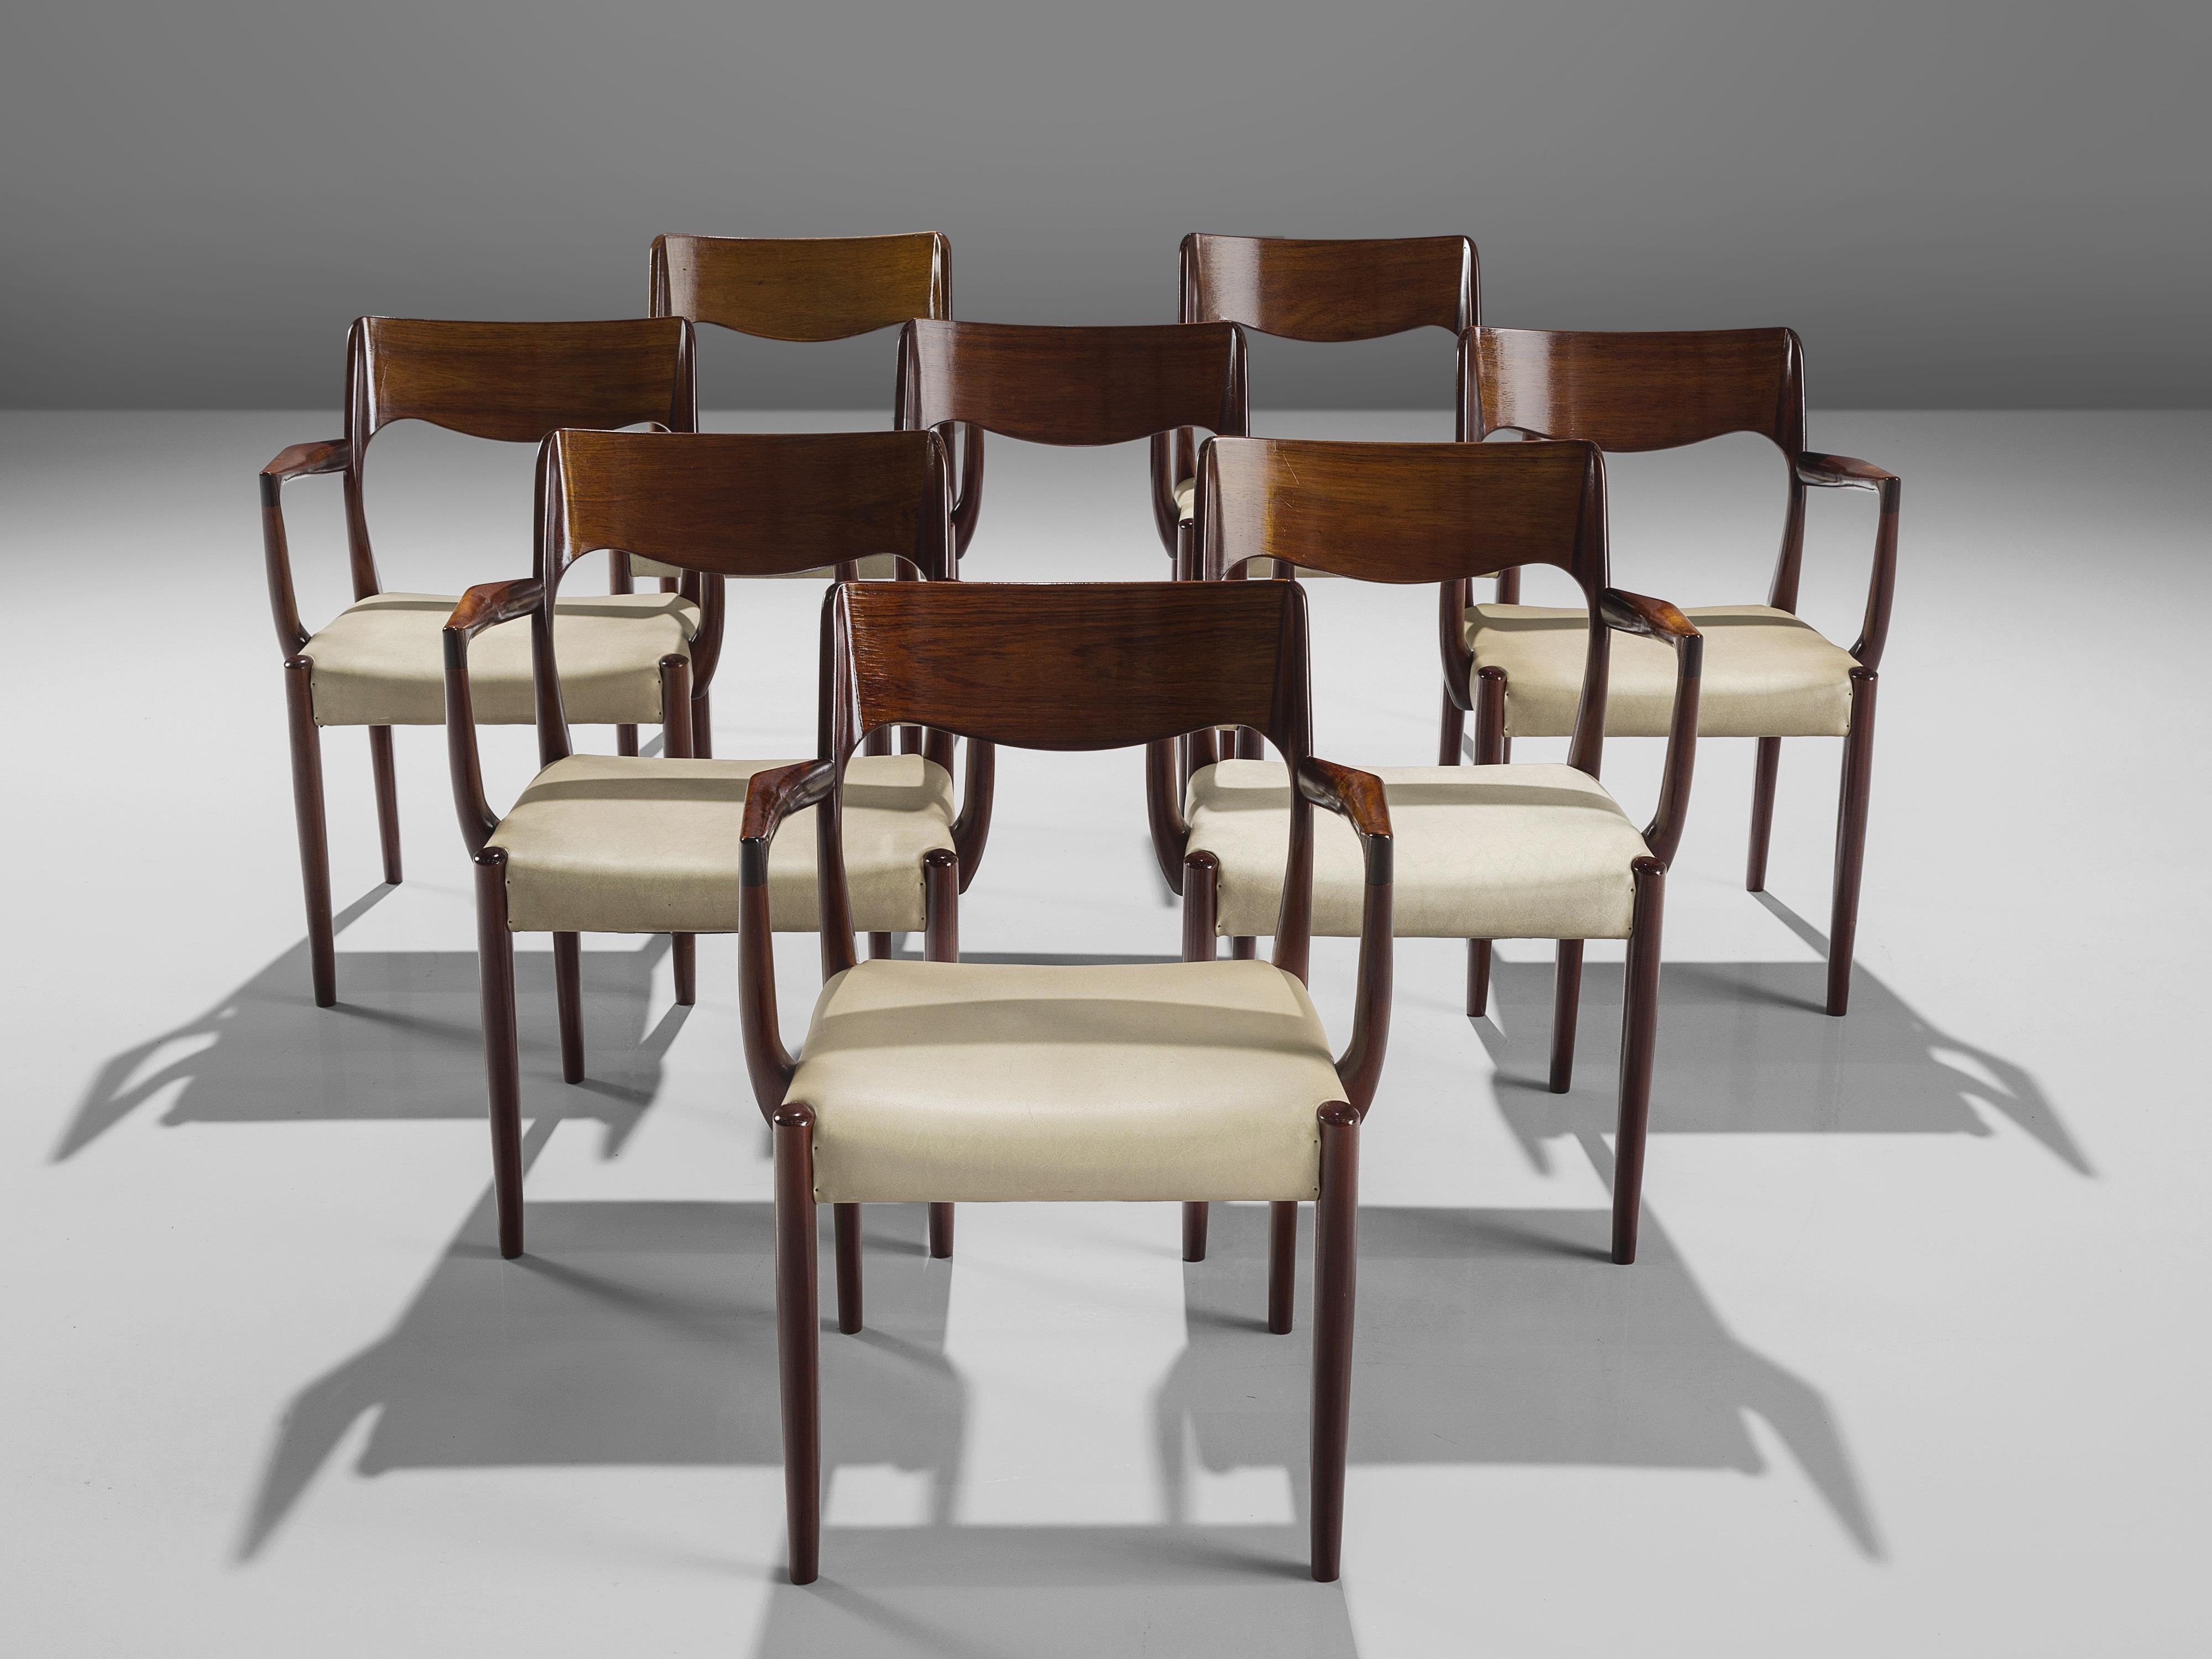 Set of eight armchairs, wood, faux leather upholstery, Denmark, 1950s.
 
This set of chairs shows subtle lines and beautiful curves. The way the backrest is designed with a dynamic line the chairs remind of the model 55 by Niels O. Møller. This